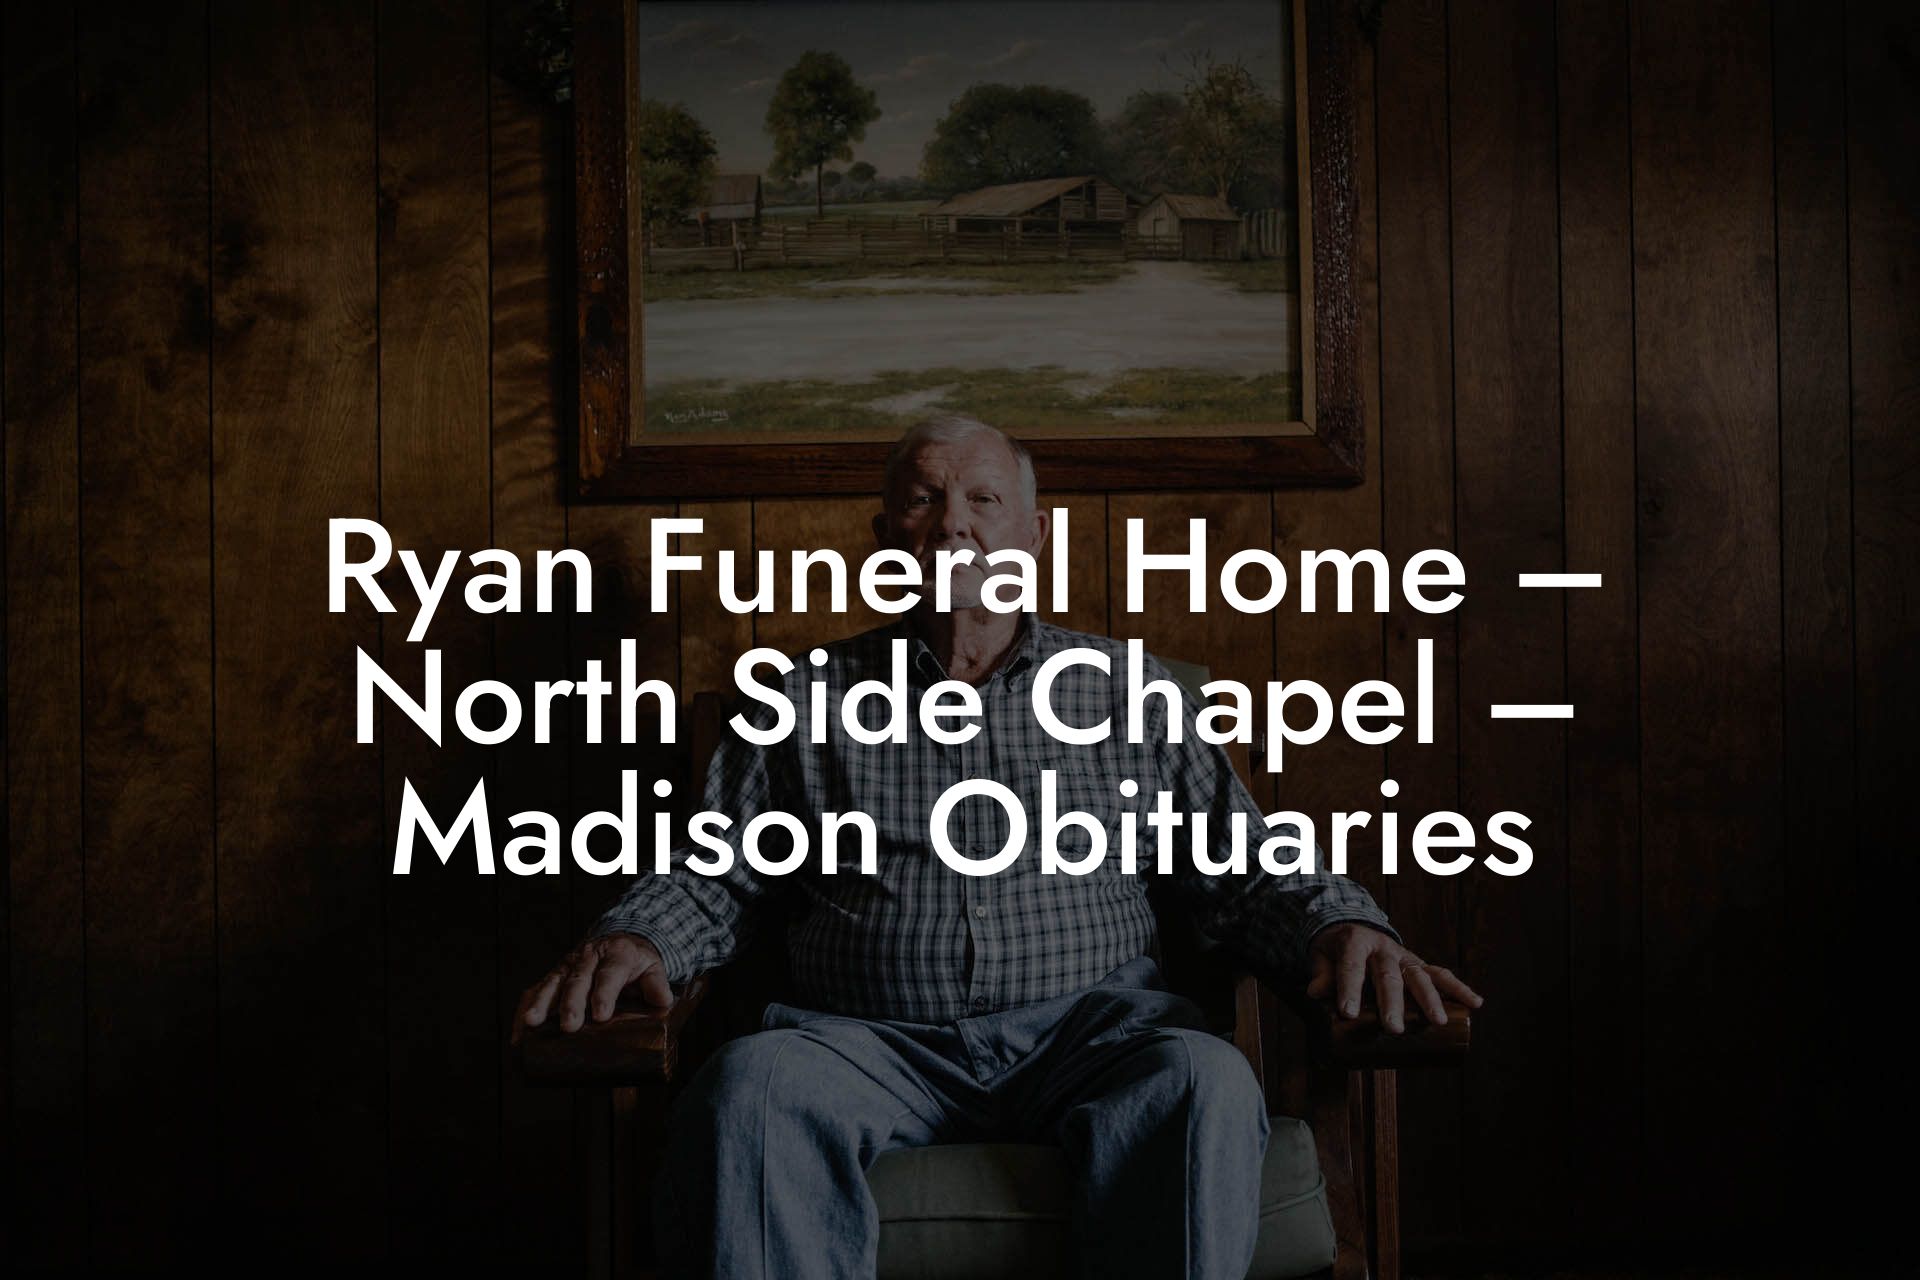 Ryan Funeral Home – North Side Chapel – Madison Obituaries